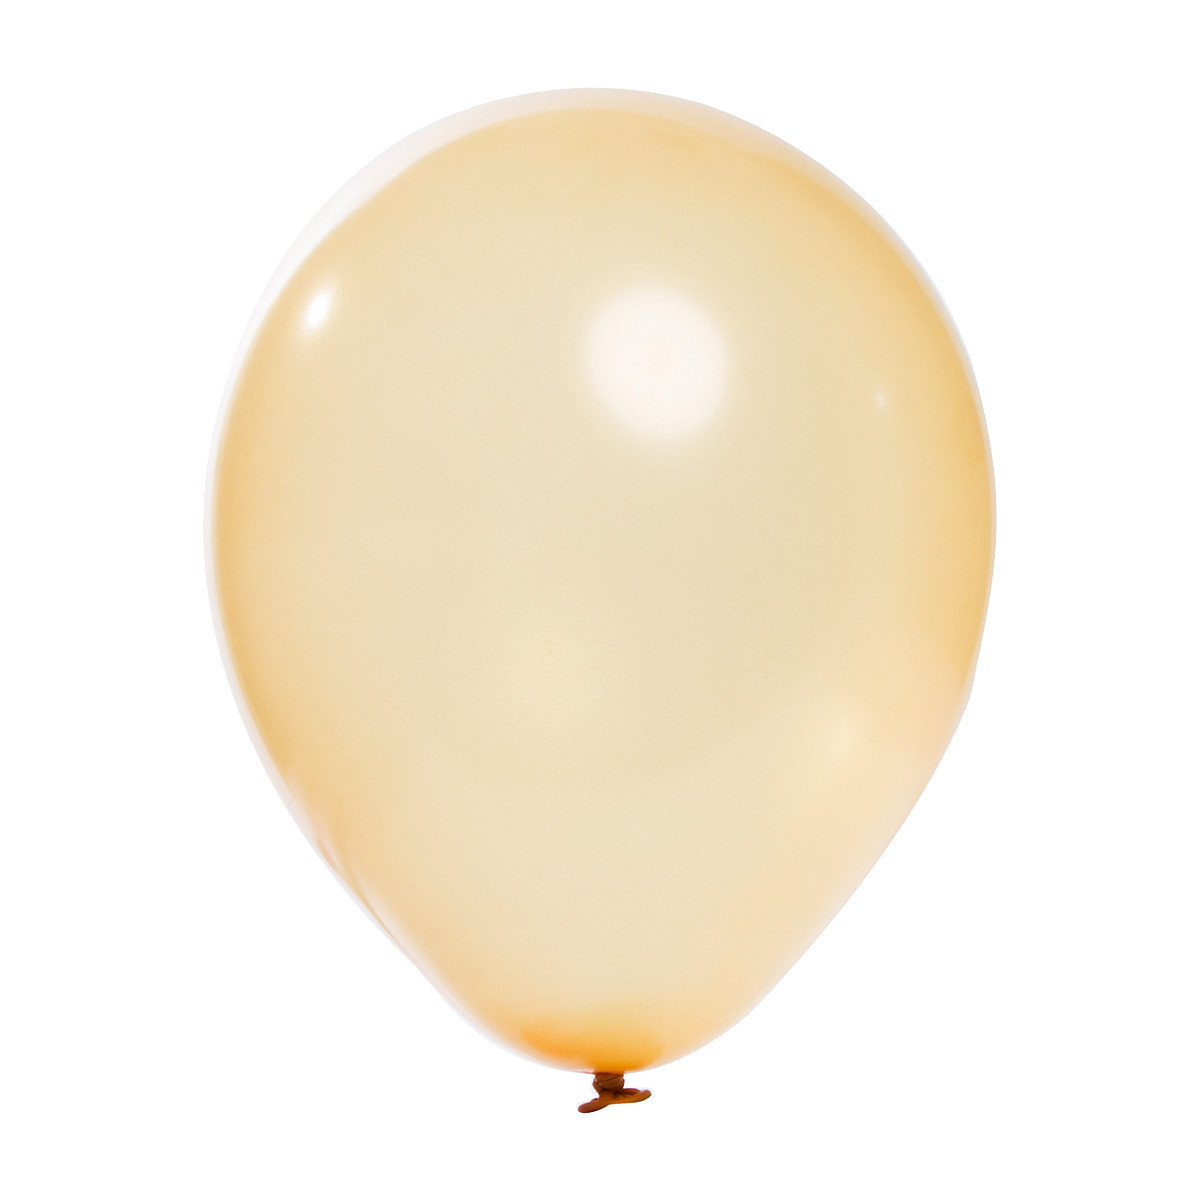 Balloons, Latex Balloons, Party Balloons, Solid Color Balloons